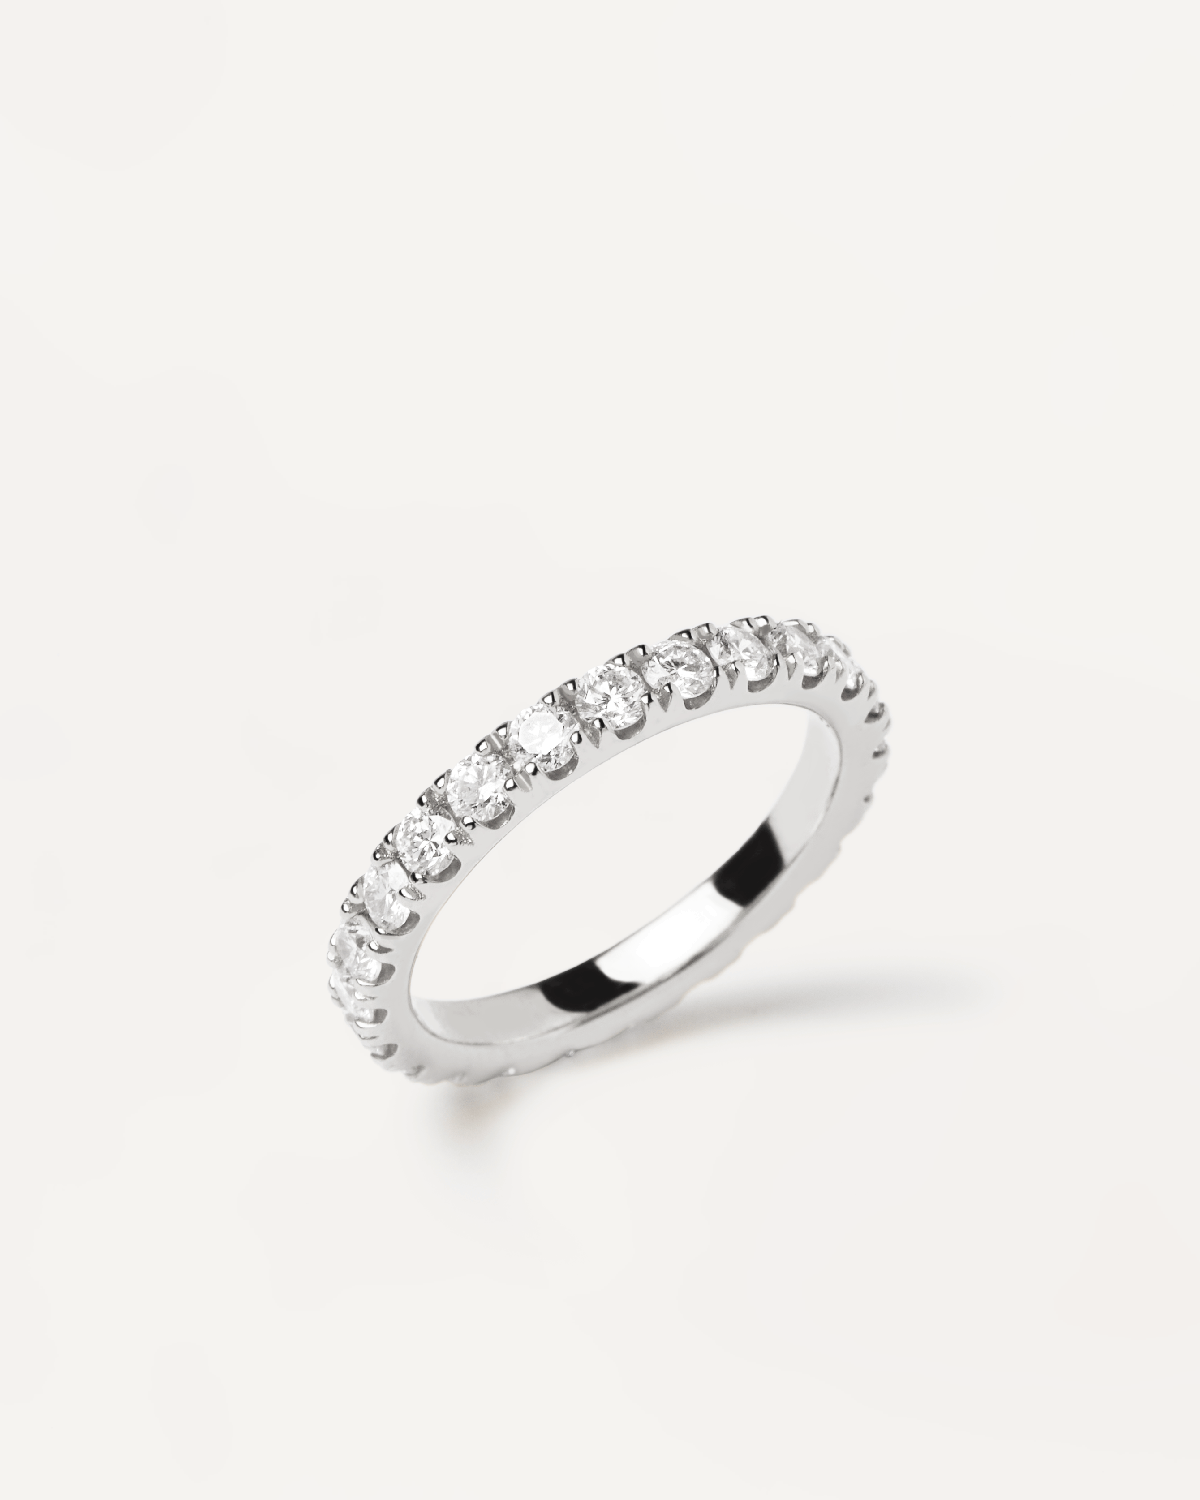 Diamonds and White Gold Eternity Supreme Ring - 18K solid white gold